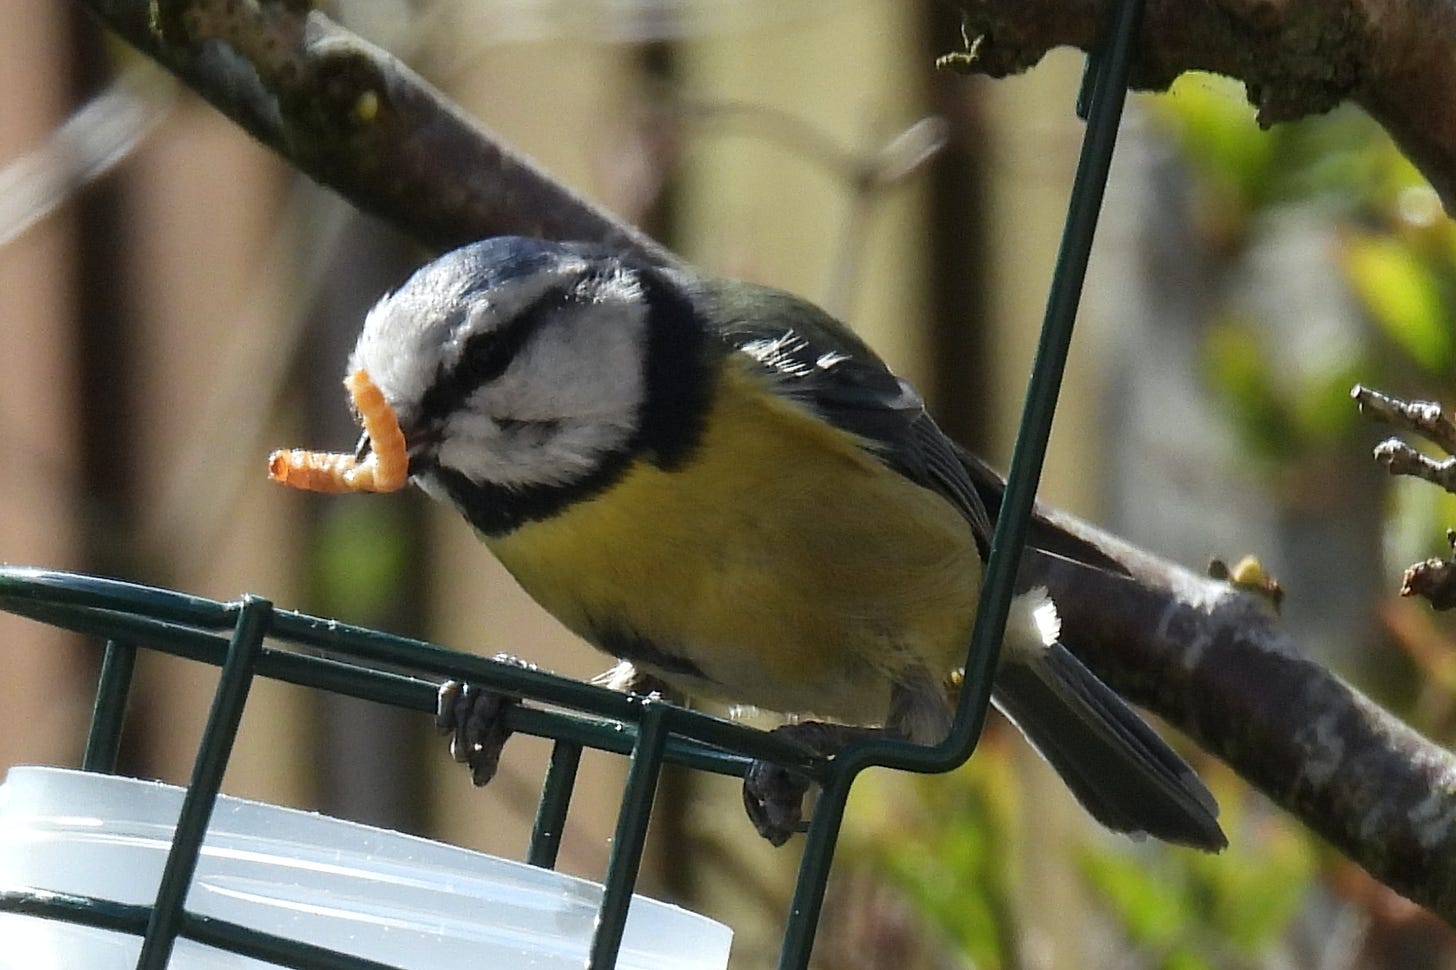 Close up of a Blue Tit with a mealworm in its mouth. Bird is sitting on a wire basket hanging from a branch that is holding a pot of mealworms.